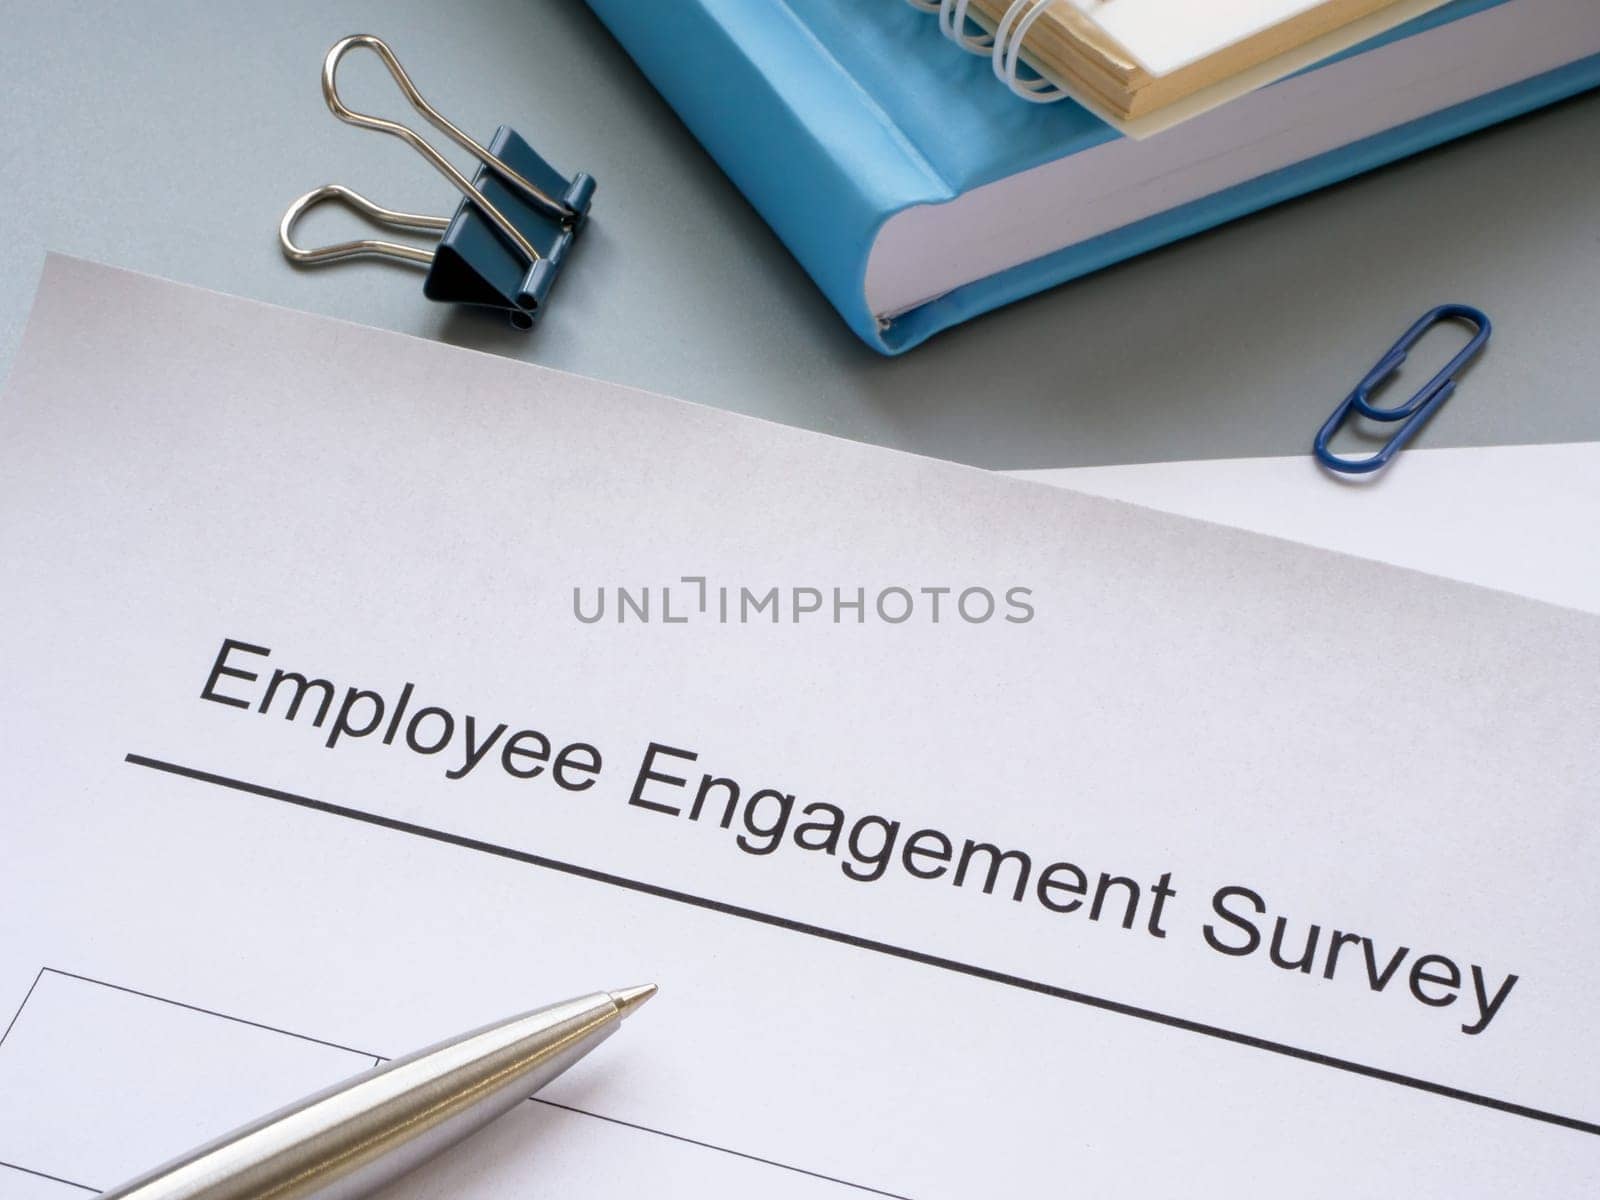 Employee engagement survey, notepads and a pen.